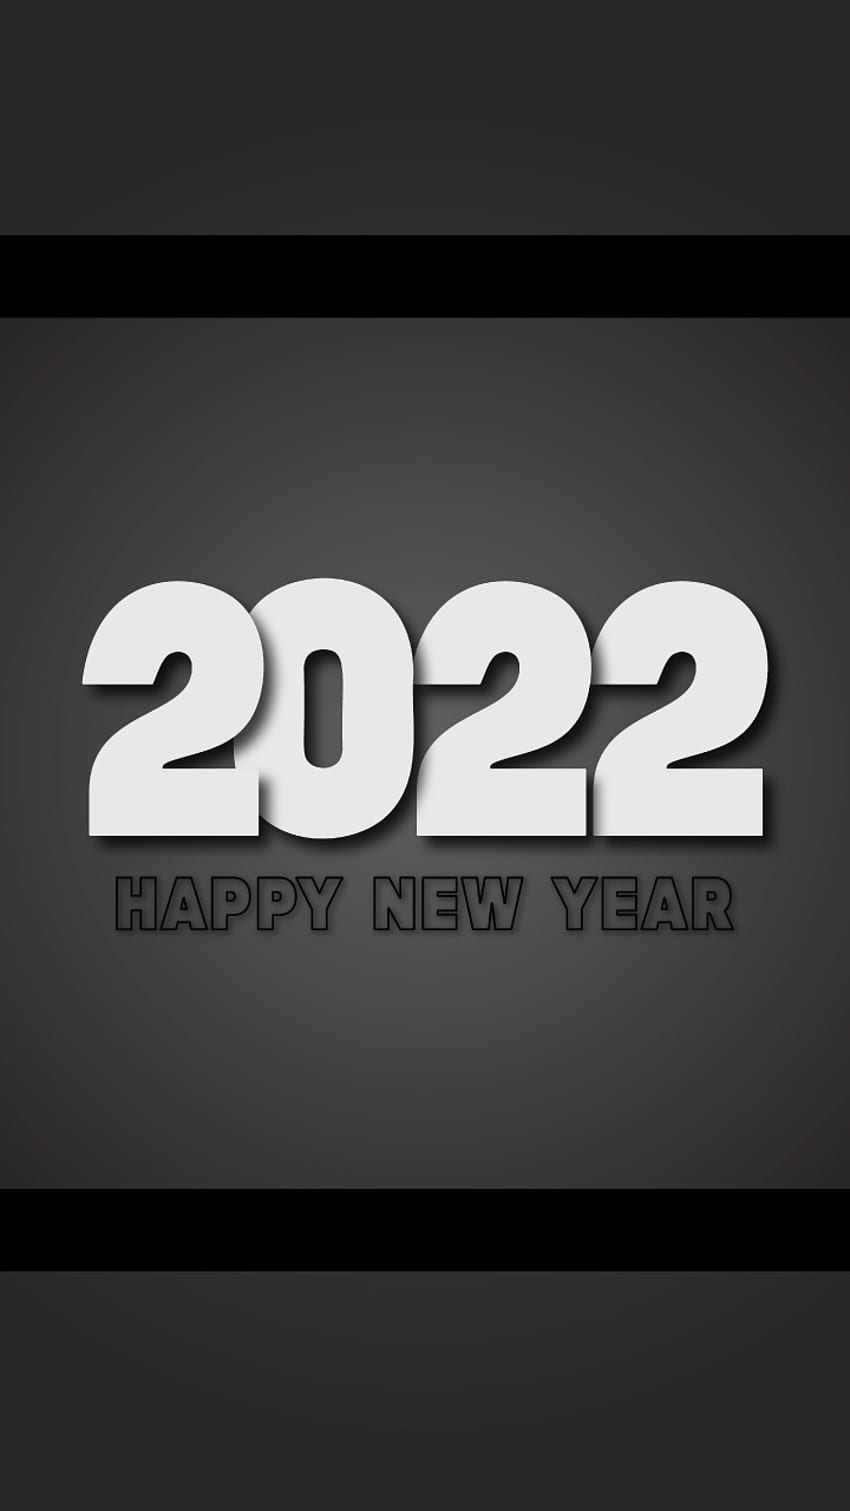 Happy New Year 2022, happy new year, monochrome graphy, 2022 pic, 2022 calender, new year HD phone wallpaper